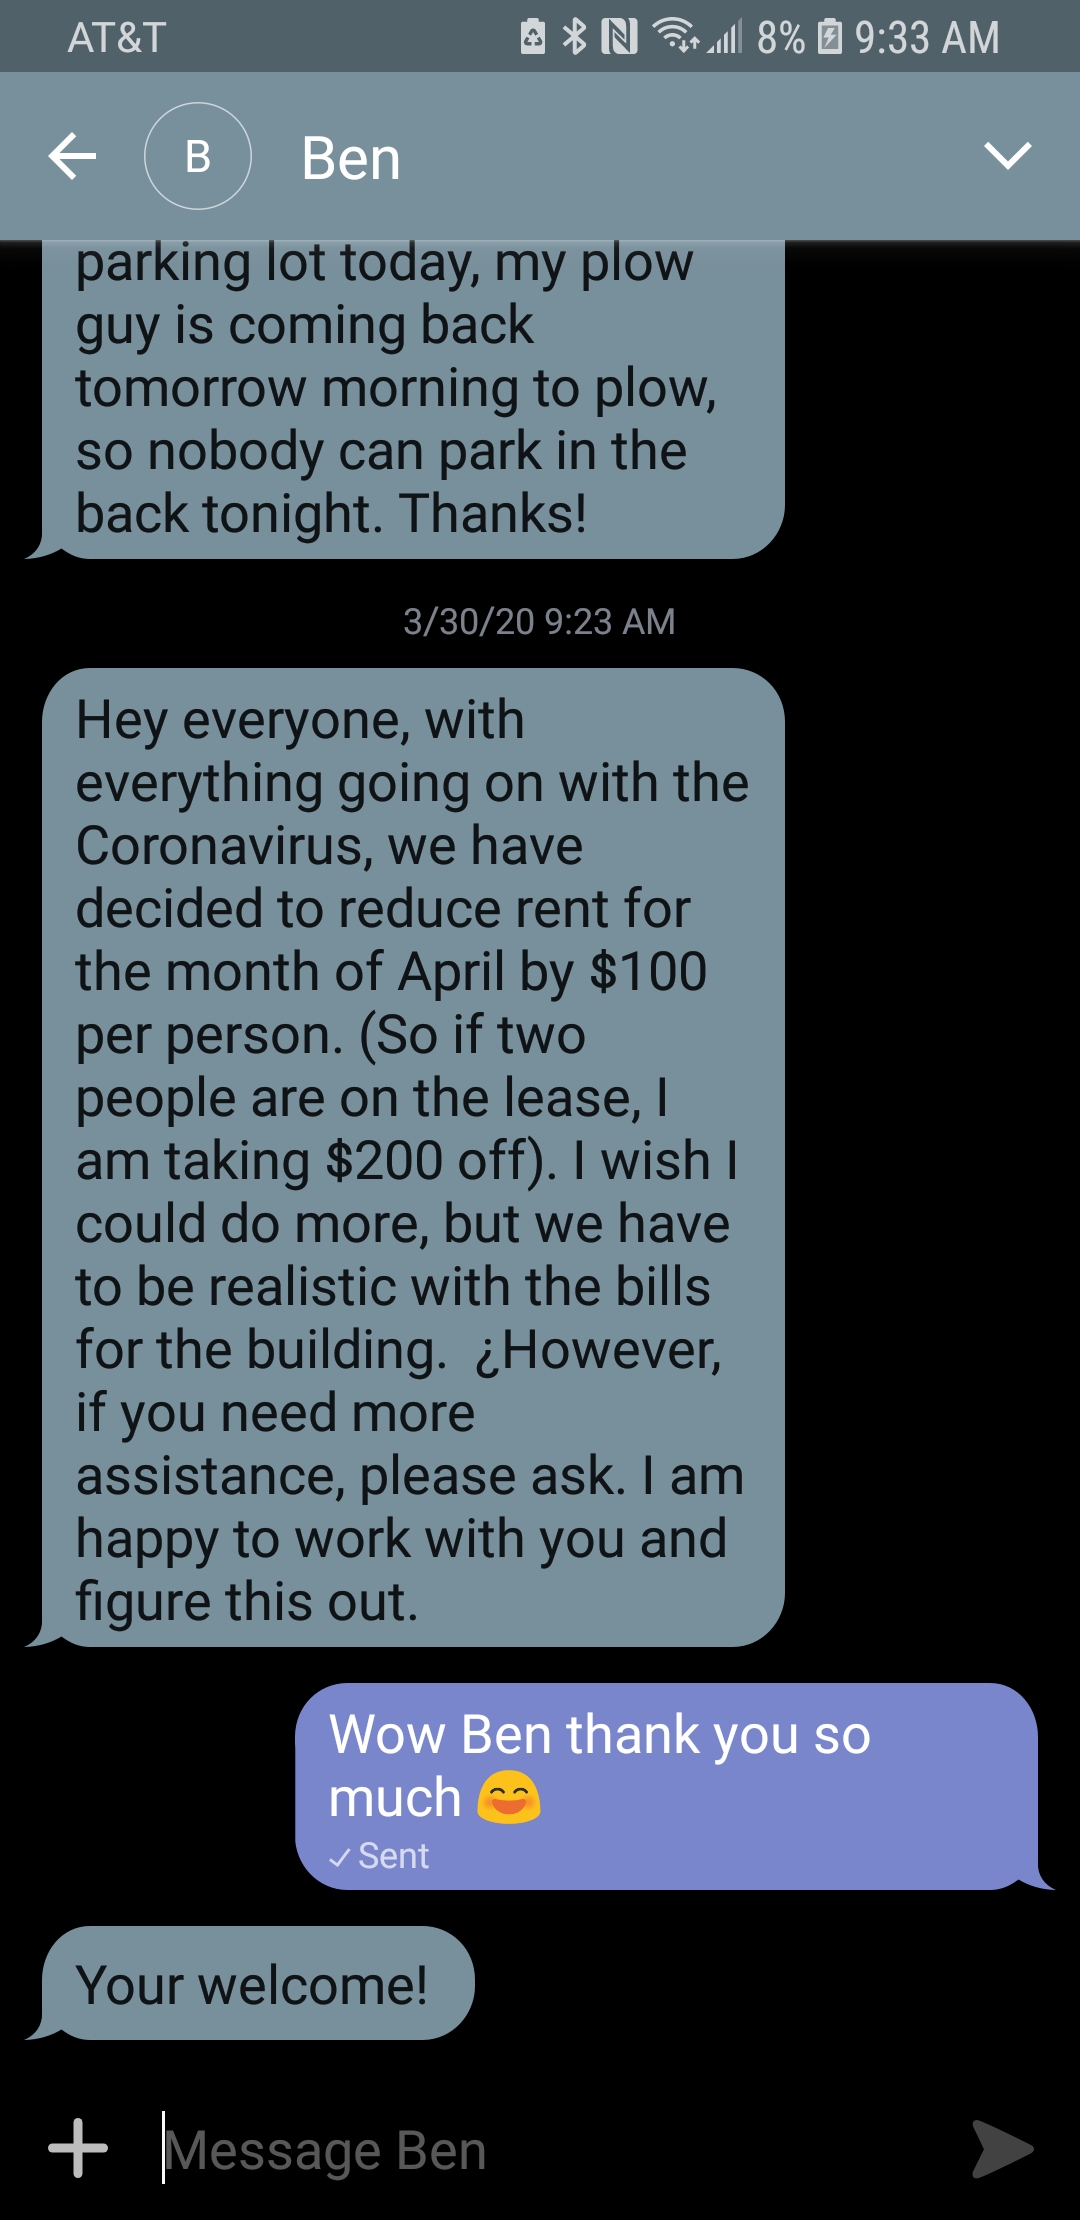 screenshot - At&T Osns 8% B Ben parking lot today, my plow guy is coming back tomorrow morning to plow, so nobody can park in the back tonight. Thanks! 33020 Hey everyone, with everything going on with the Coronavirus, we have decided to reduce rent for t